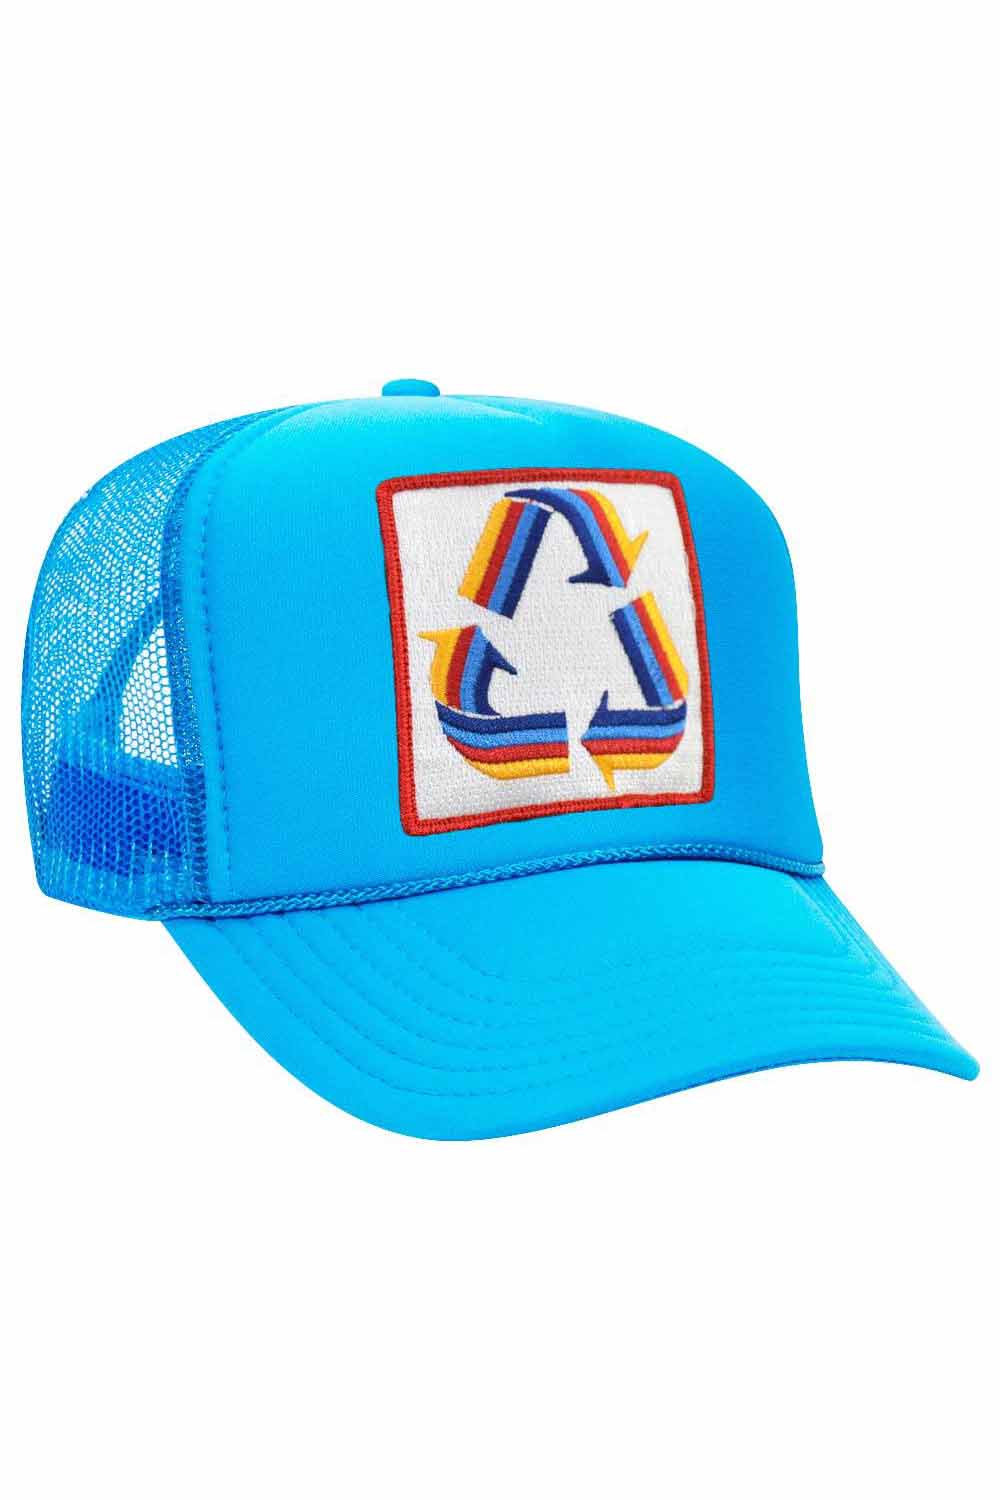 RECYCLE TRUCKER HAT HATS Aviator Nation OS NEON BLUE 